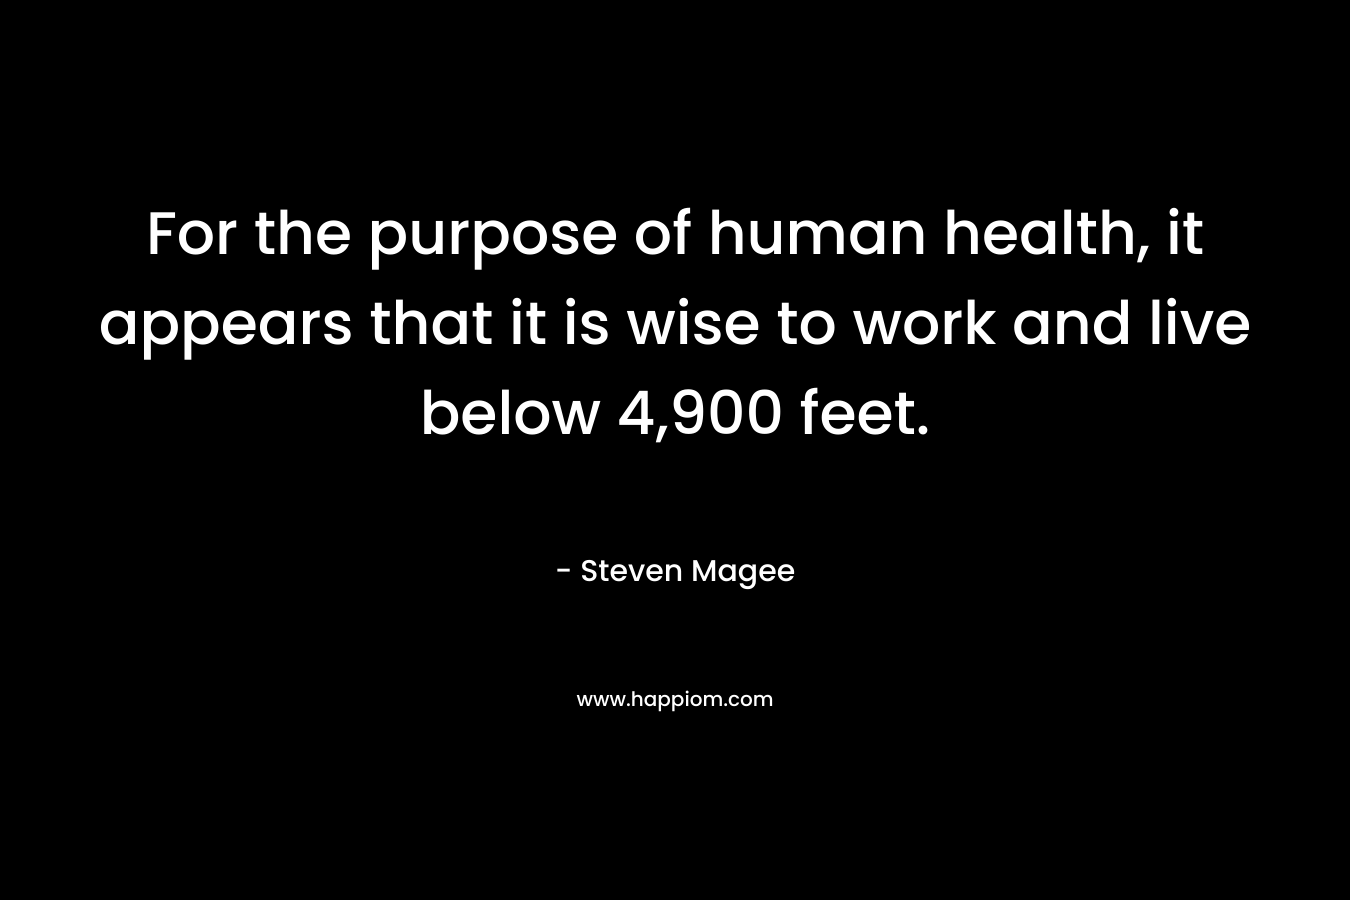 For the purpose of human health, it appears that it is wise to work and live below 4,900 feet.